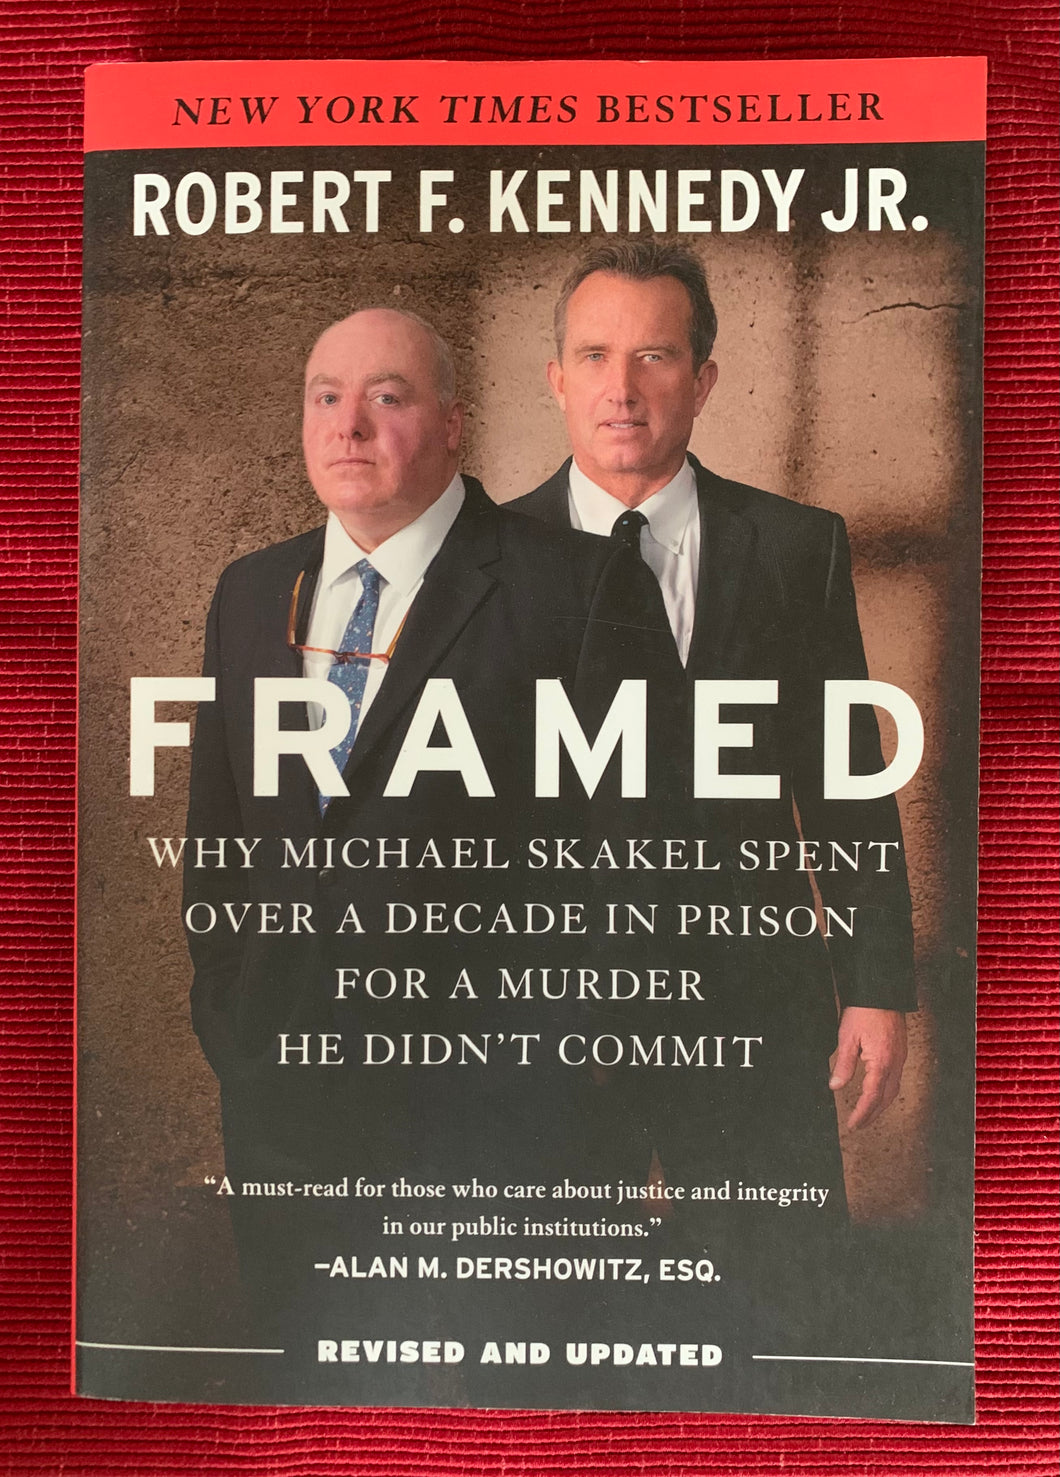 Framed: Why Michael Skakel Spent Over a Decade in Prison for a Murder he Didn't Commit